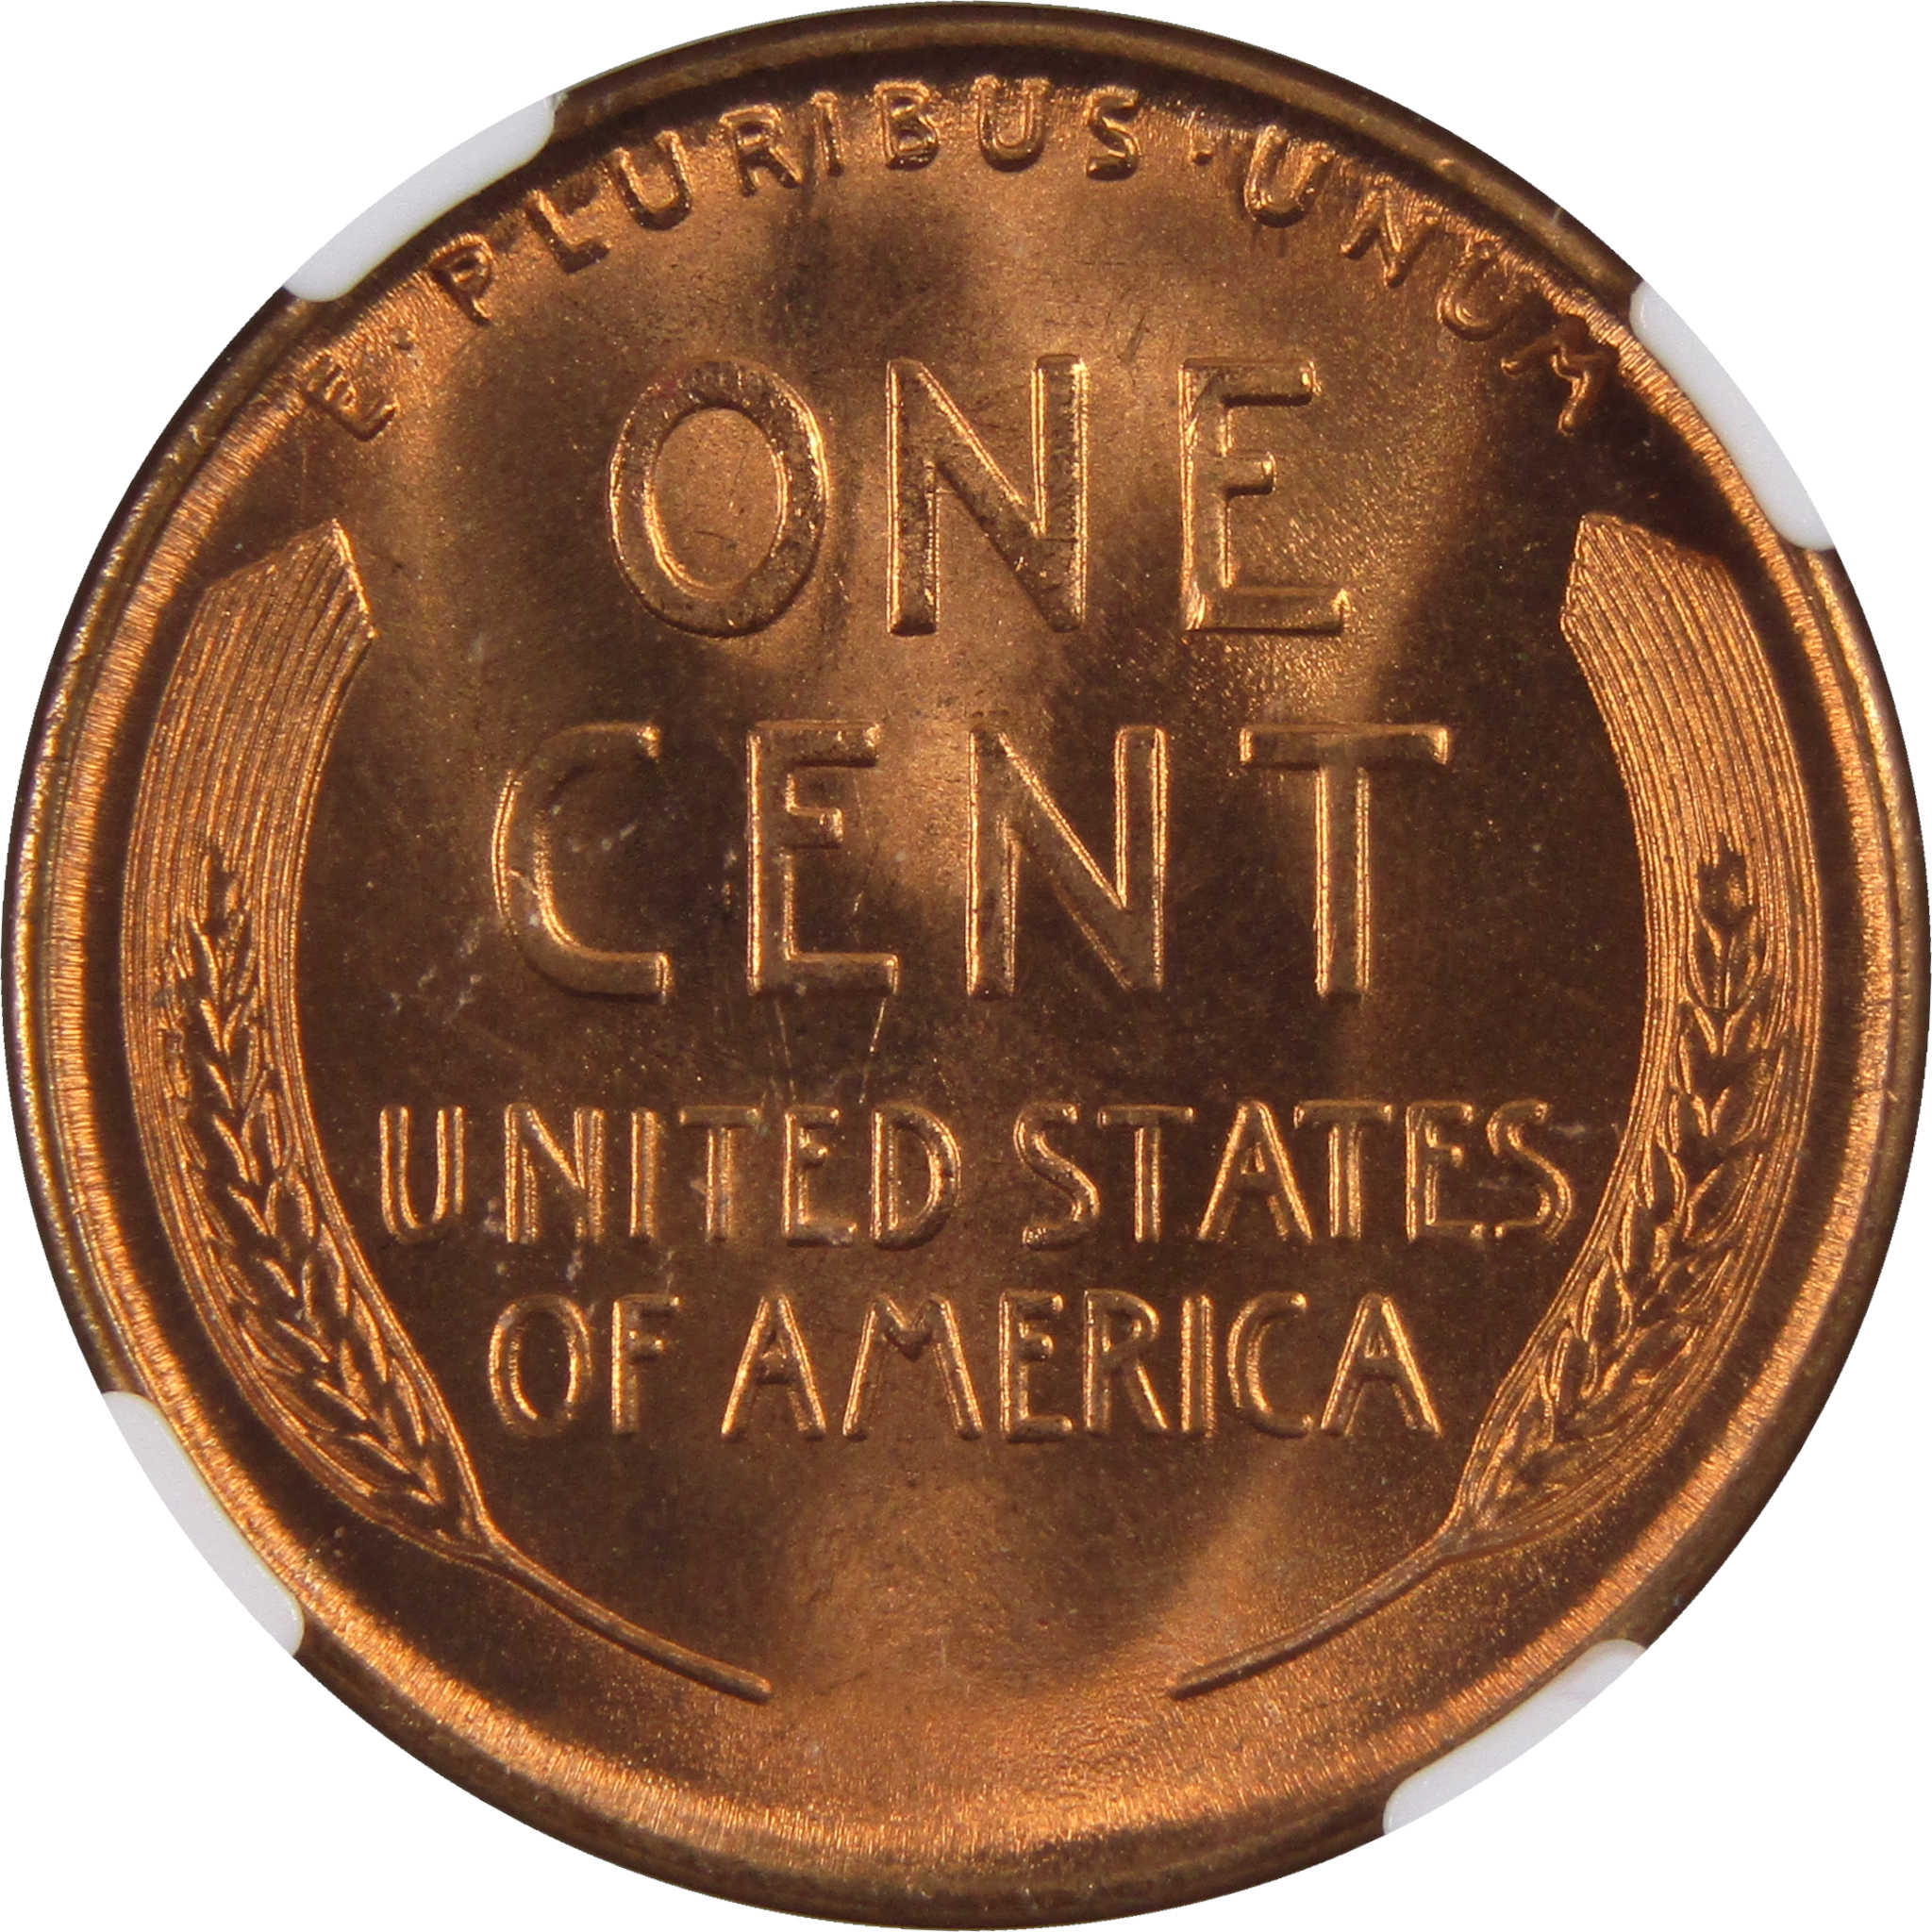 1939 Lincoln Wheat Cent MS 67 RD NGC Penny 1c Uncirculated SKU:I3144